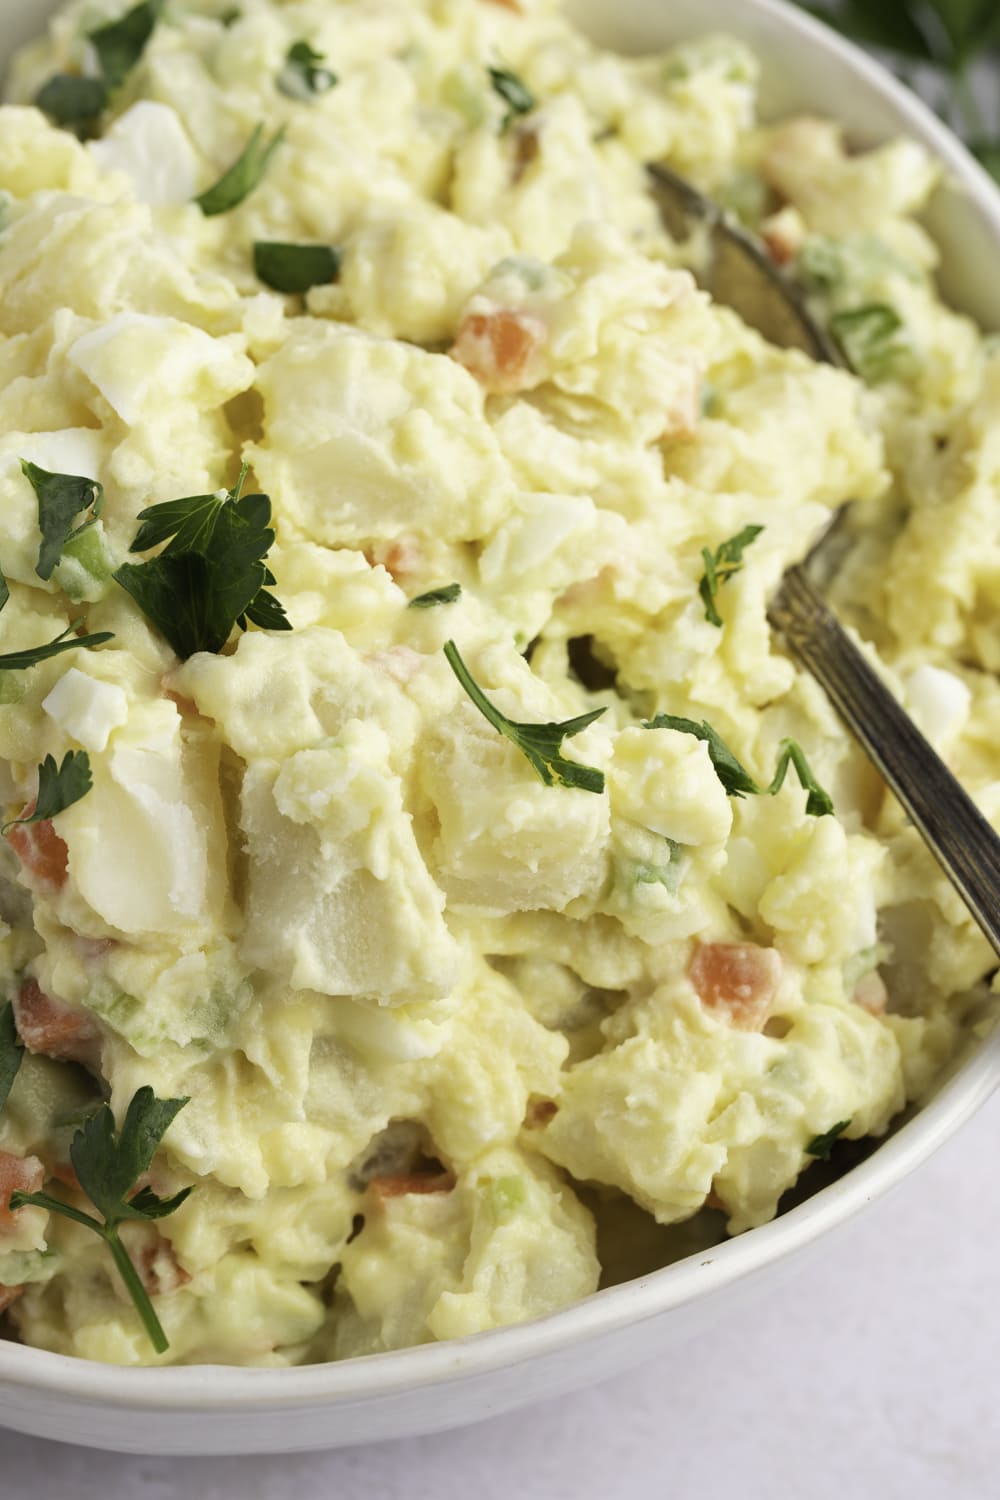 Amish Potato Salad Topped With Freshly Sliced Celery